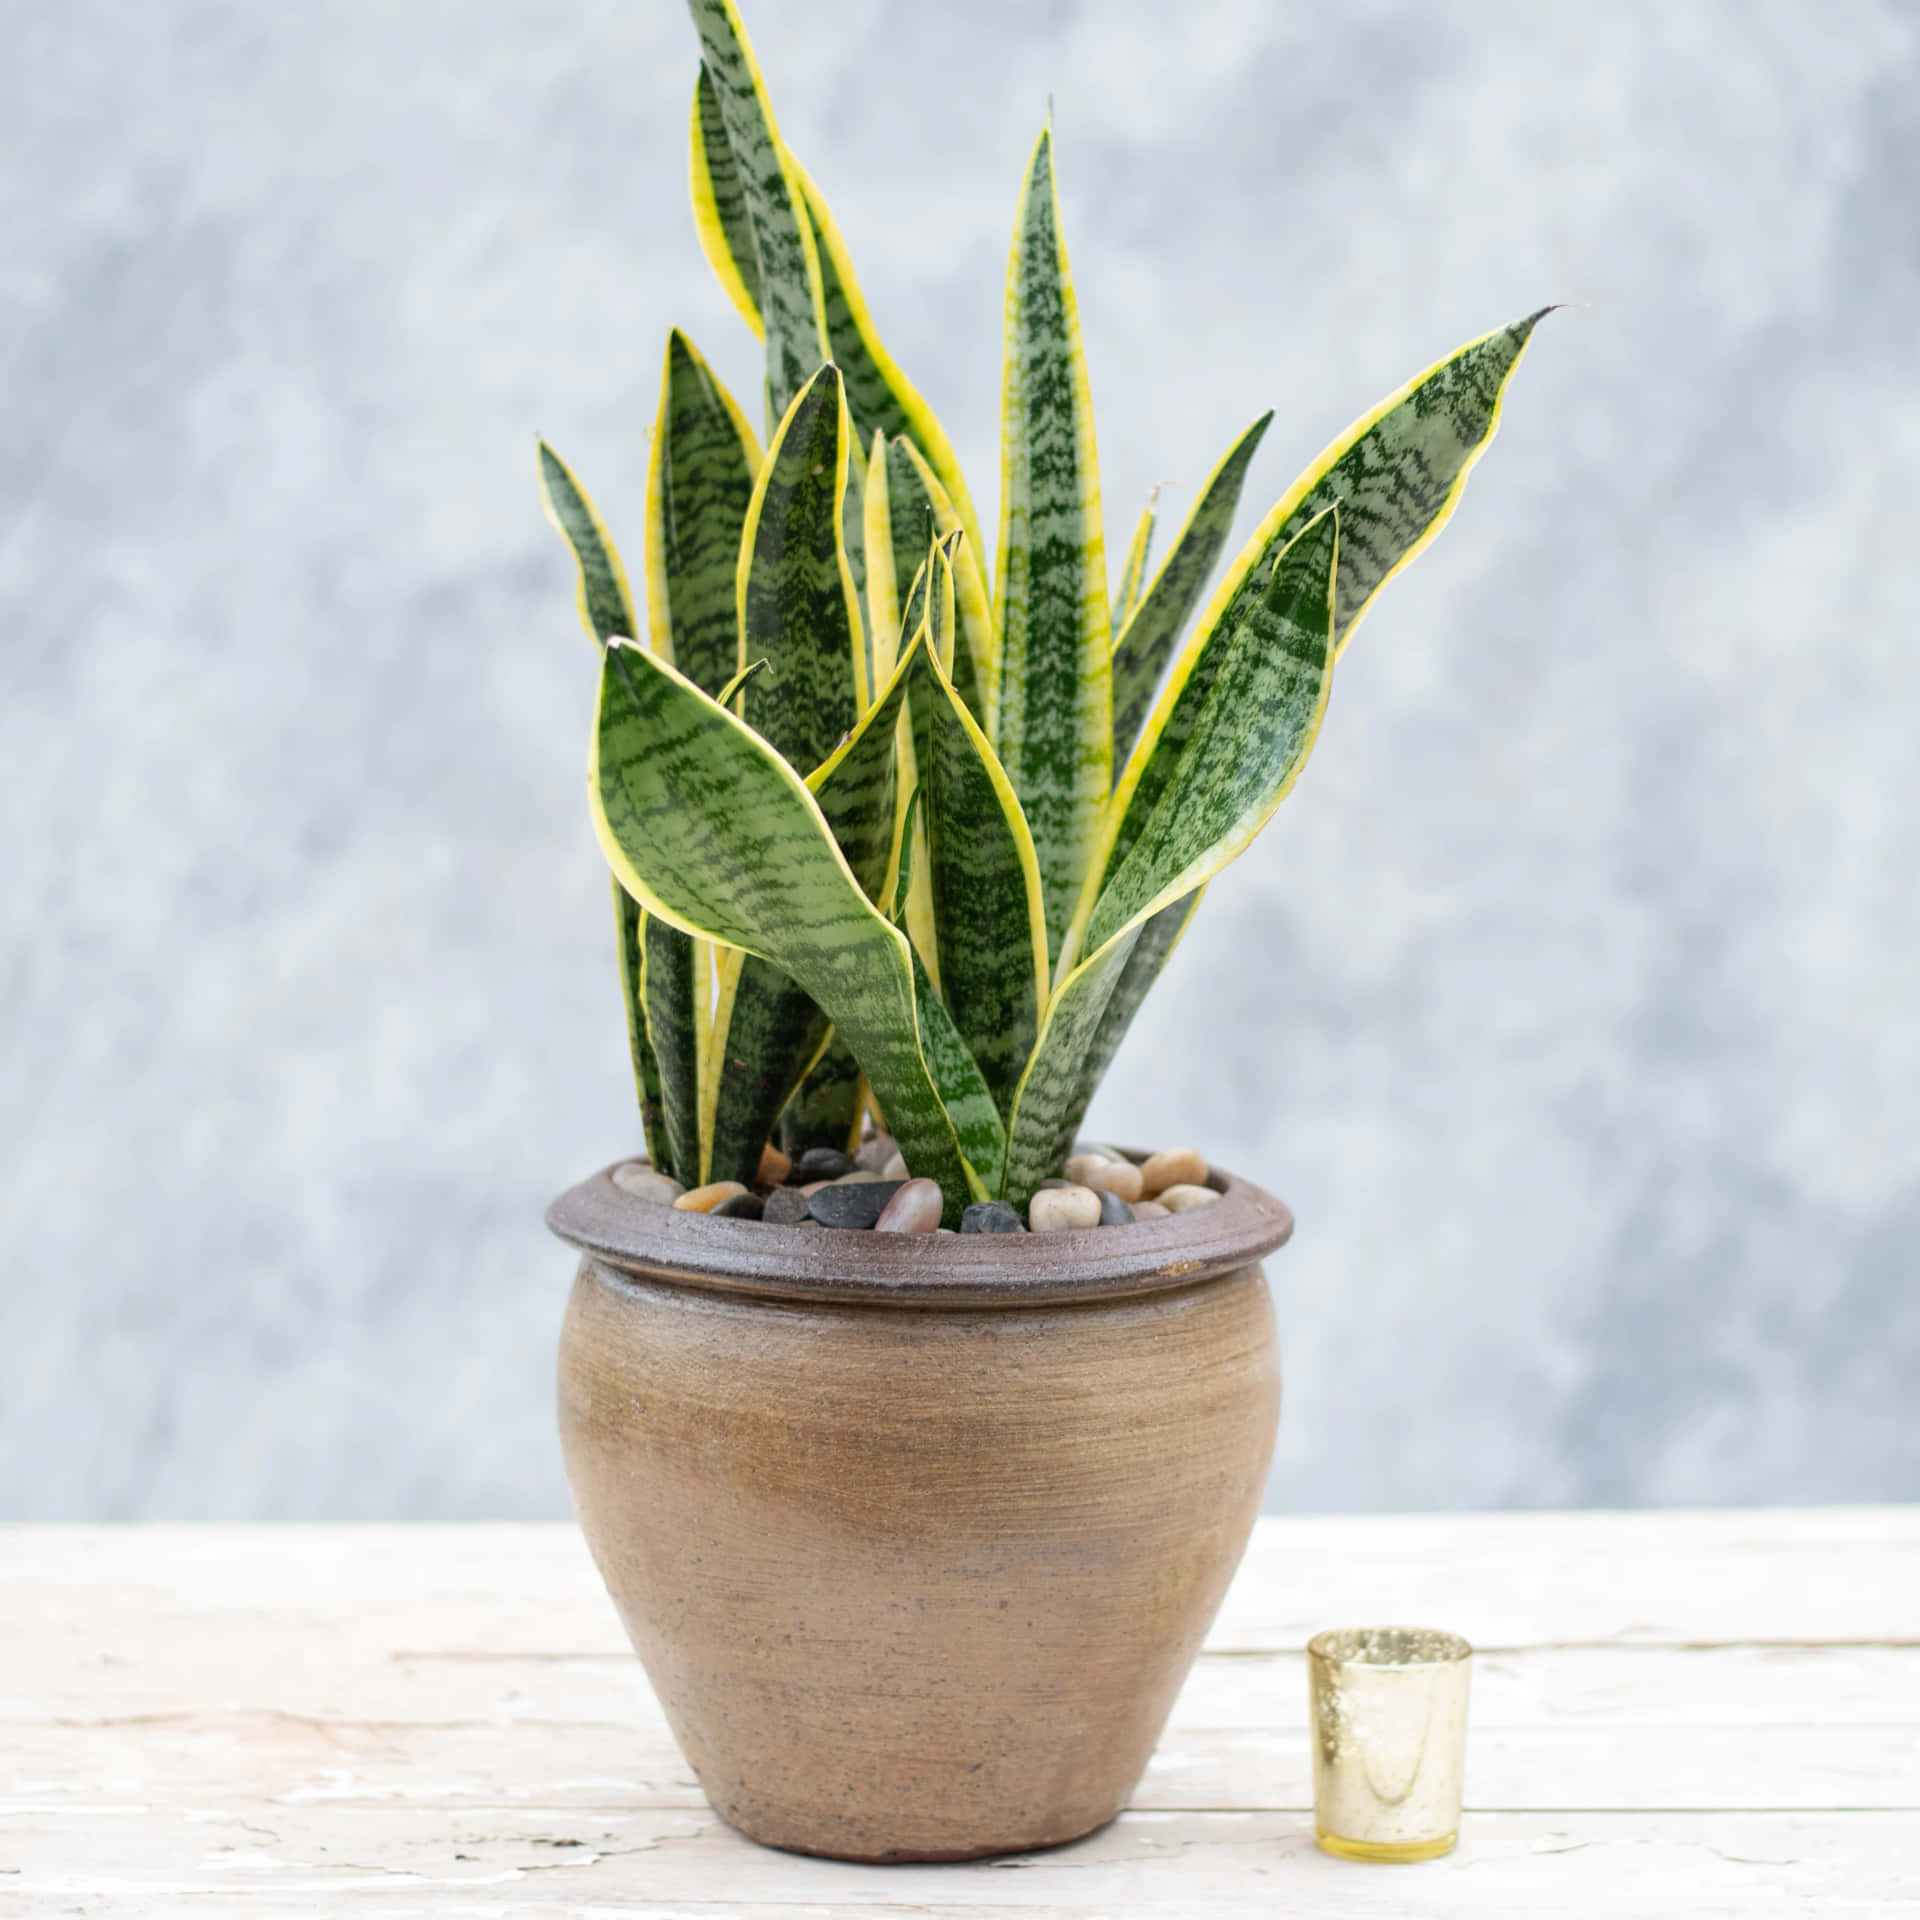 Snake Plant is a low-maintenance aggressive air purifier